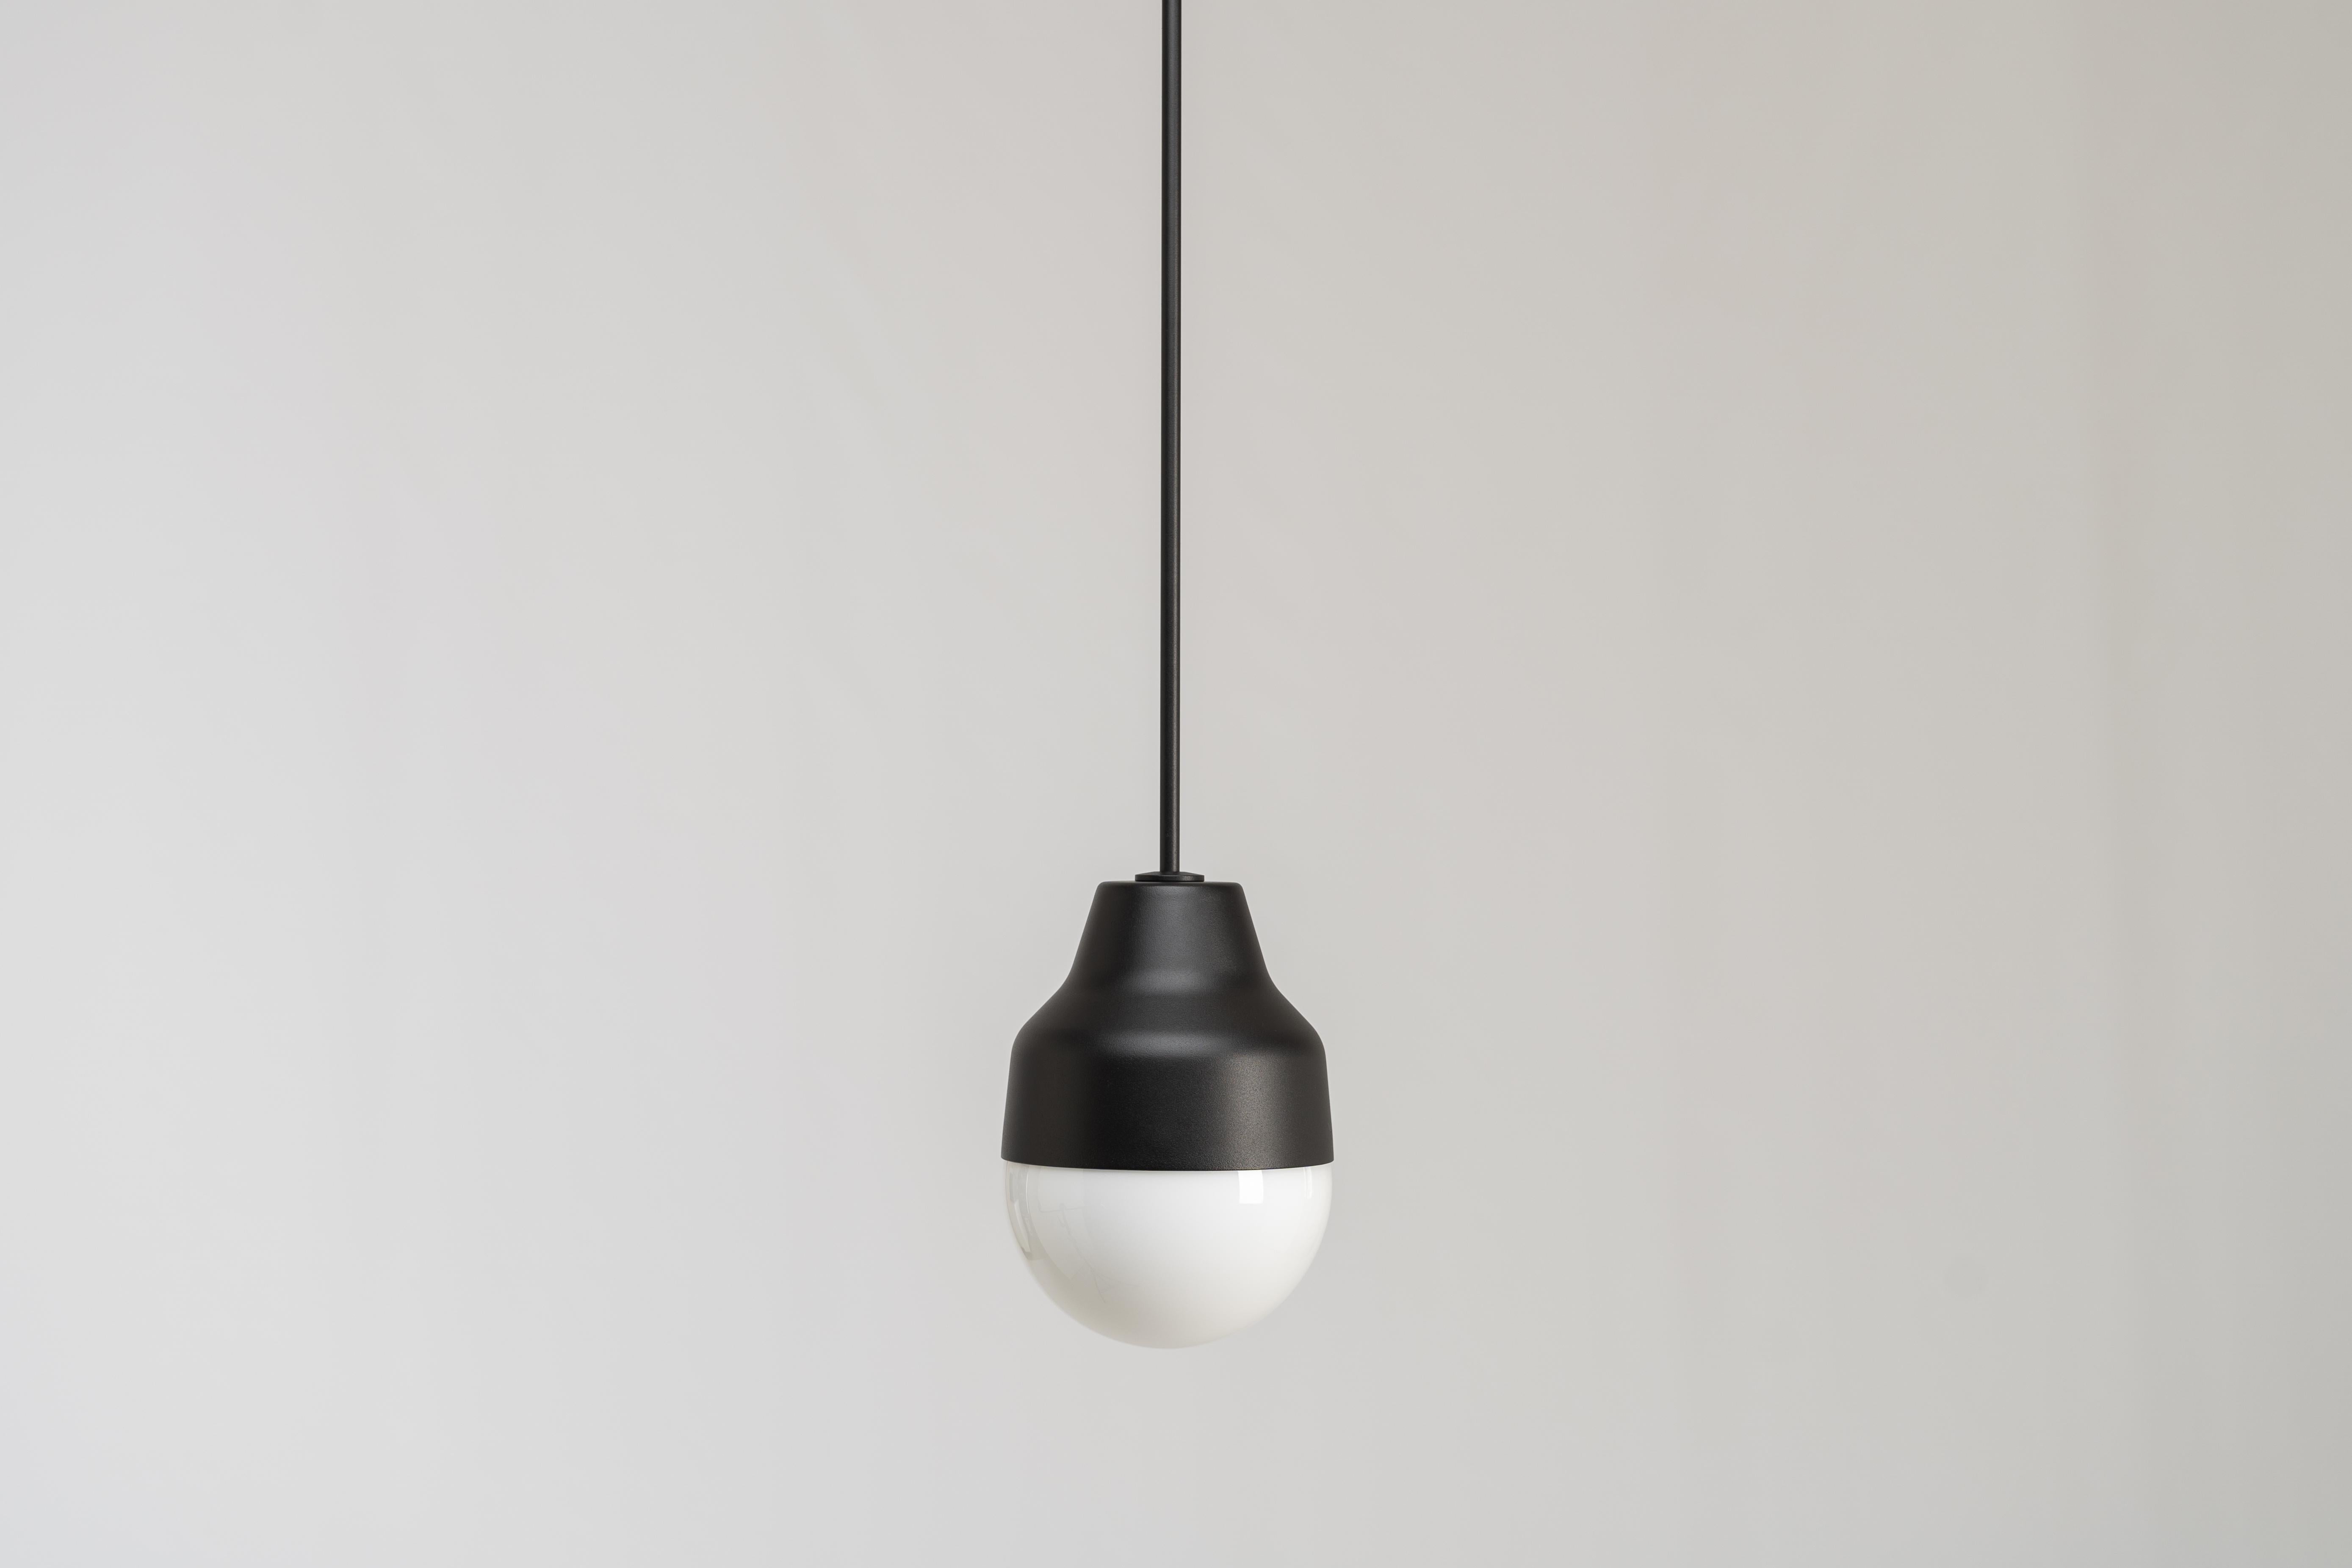 Ambiguo type-01 by Saarepera & Mae
Pendant lamp

Materials: Mouth-blown Murano glass / stainless steel and aluminum
Light source: Built-in LED 100-240V / dimmable

Dimensions:
H 23.6cm / 9.3 in
D 17cm / 6.7 in

Fixing:
Hanging from a